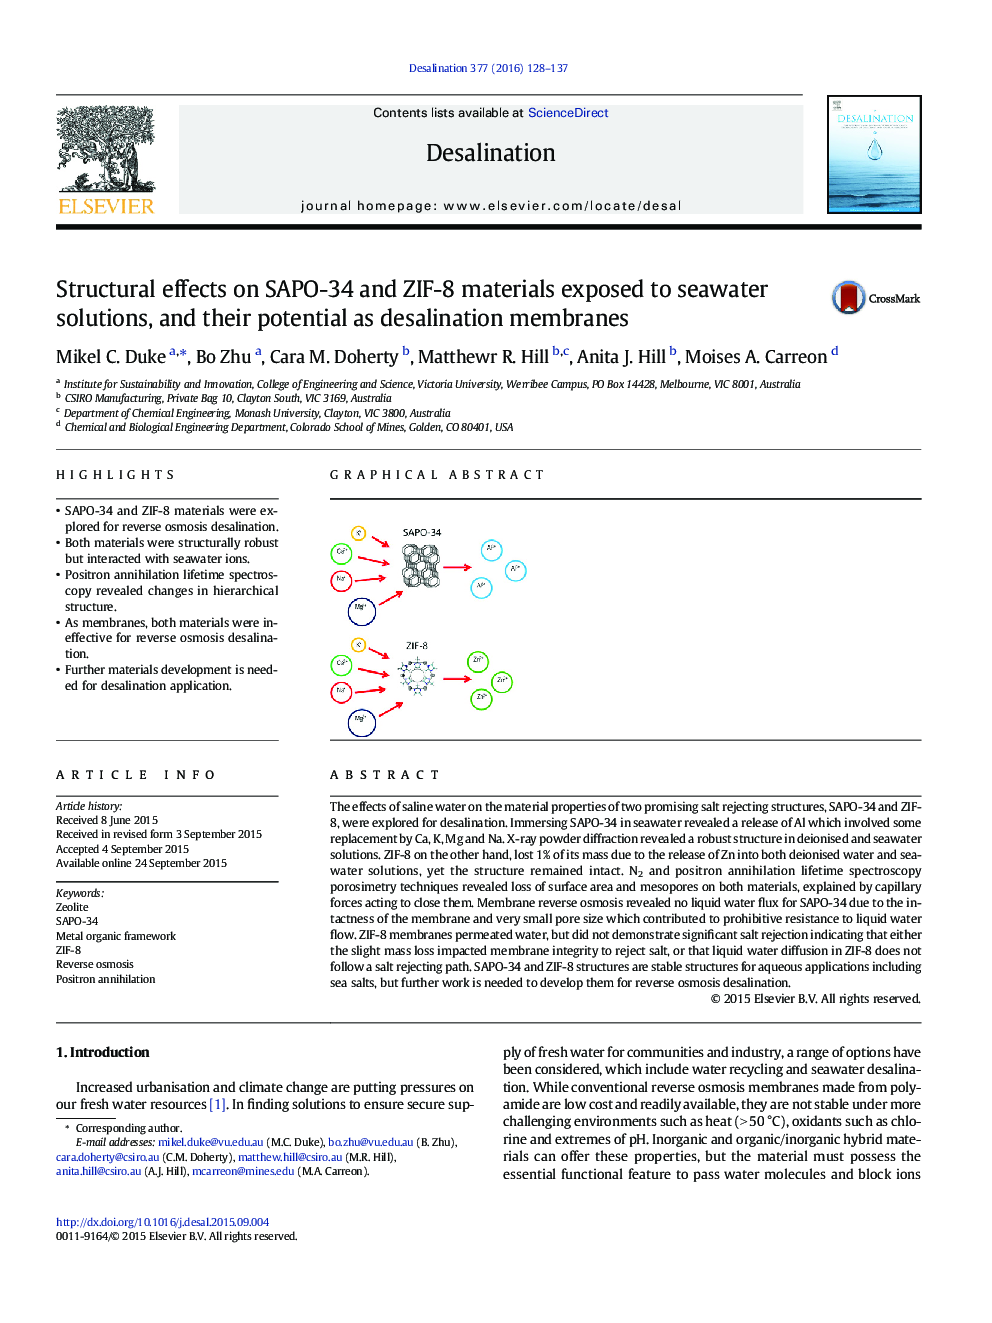 Structural effects on SAPO-34 and ZIF-8 materials exposed to seawater solutions, and their potential as desalination membranes